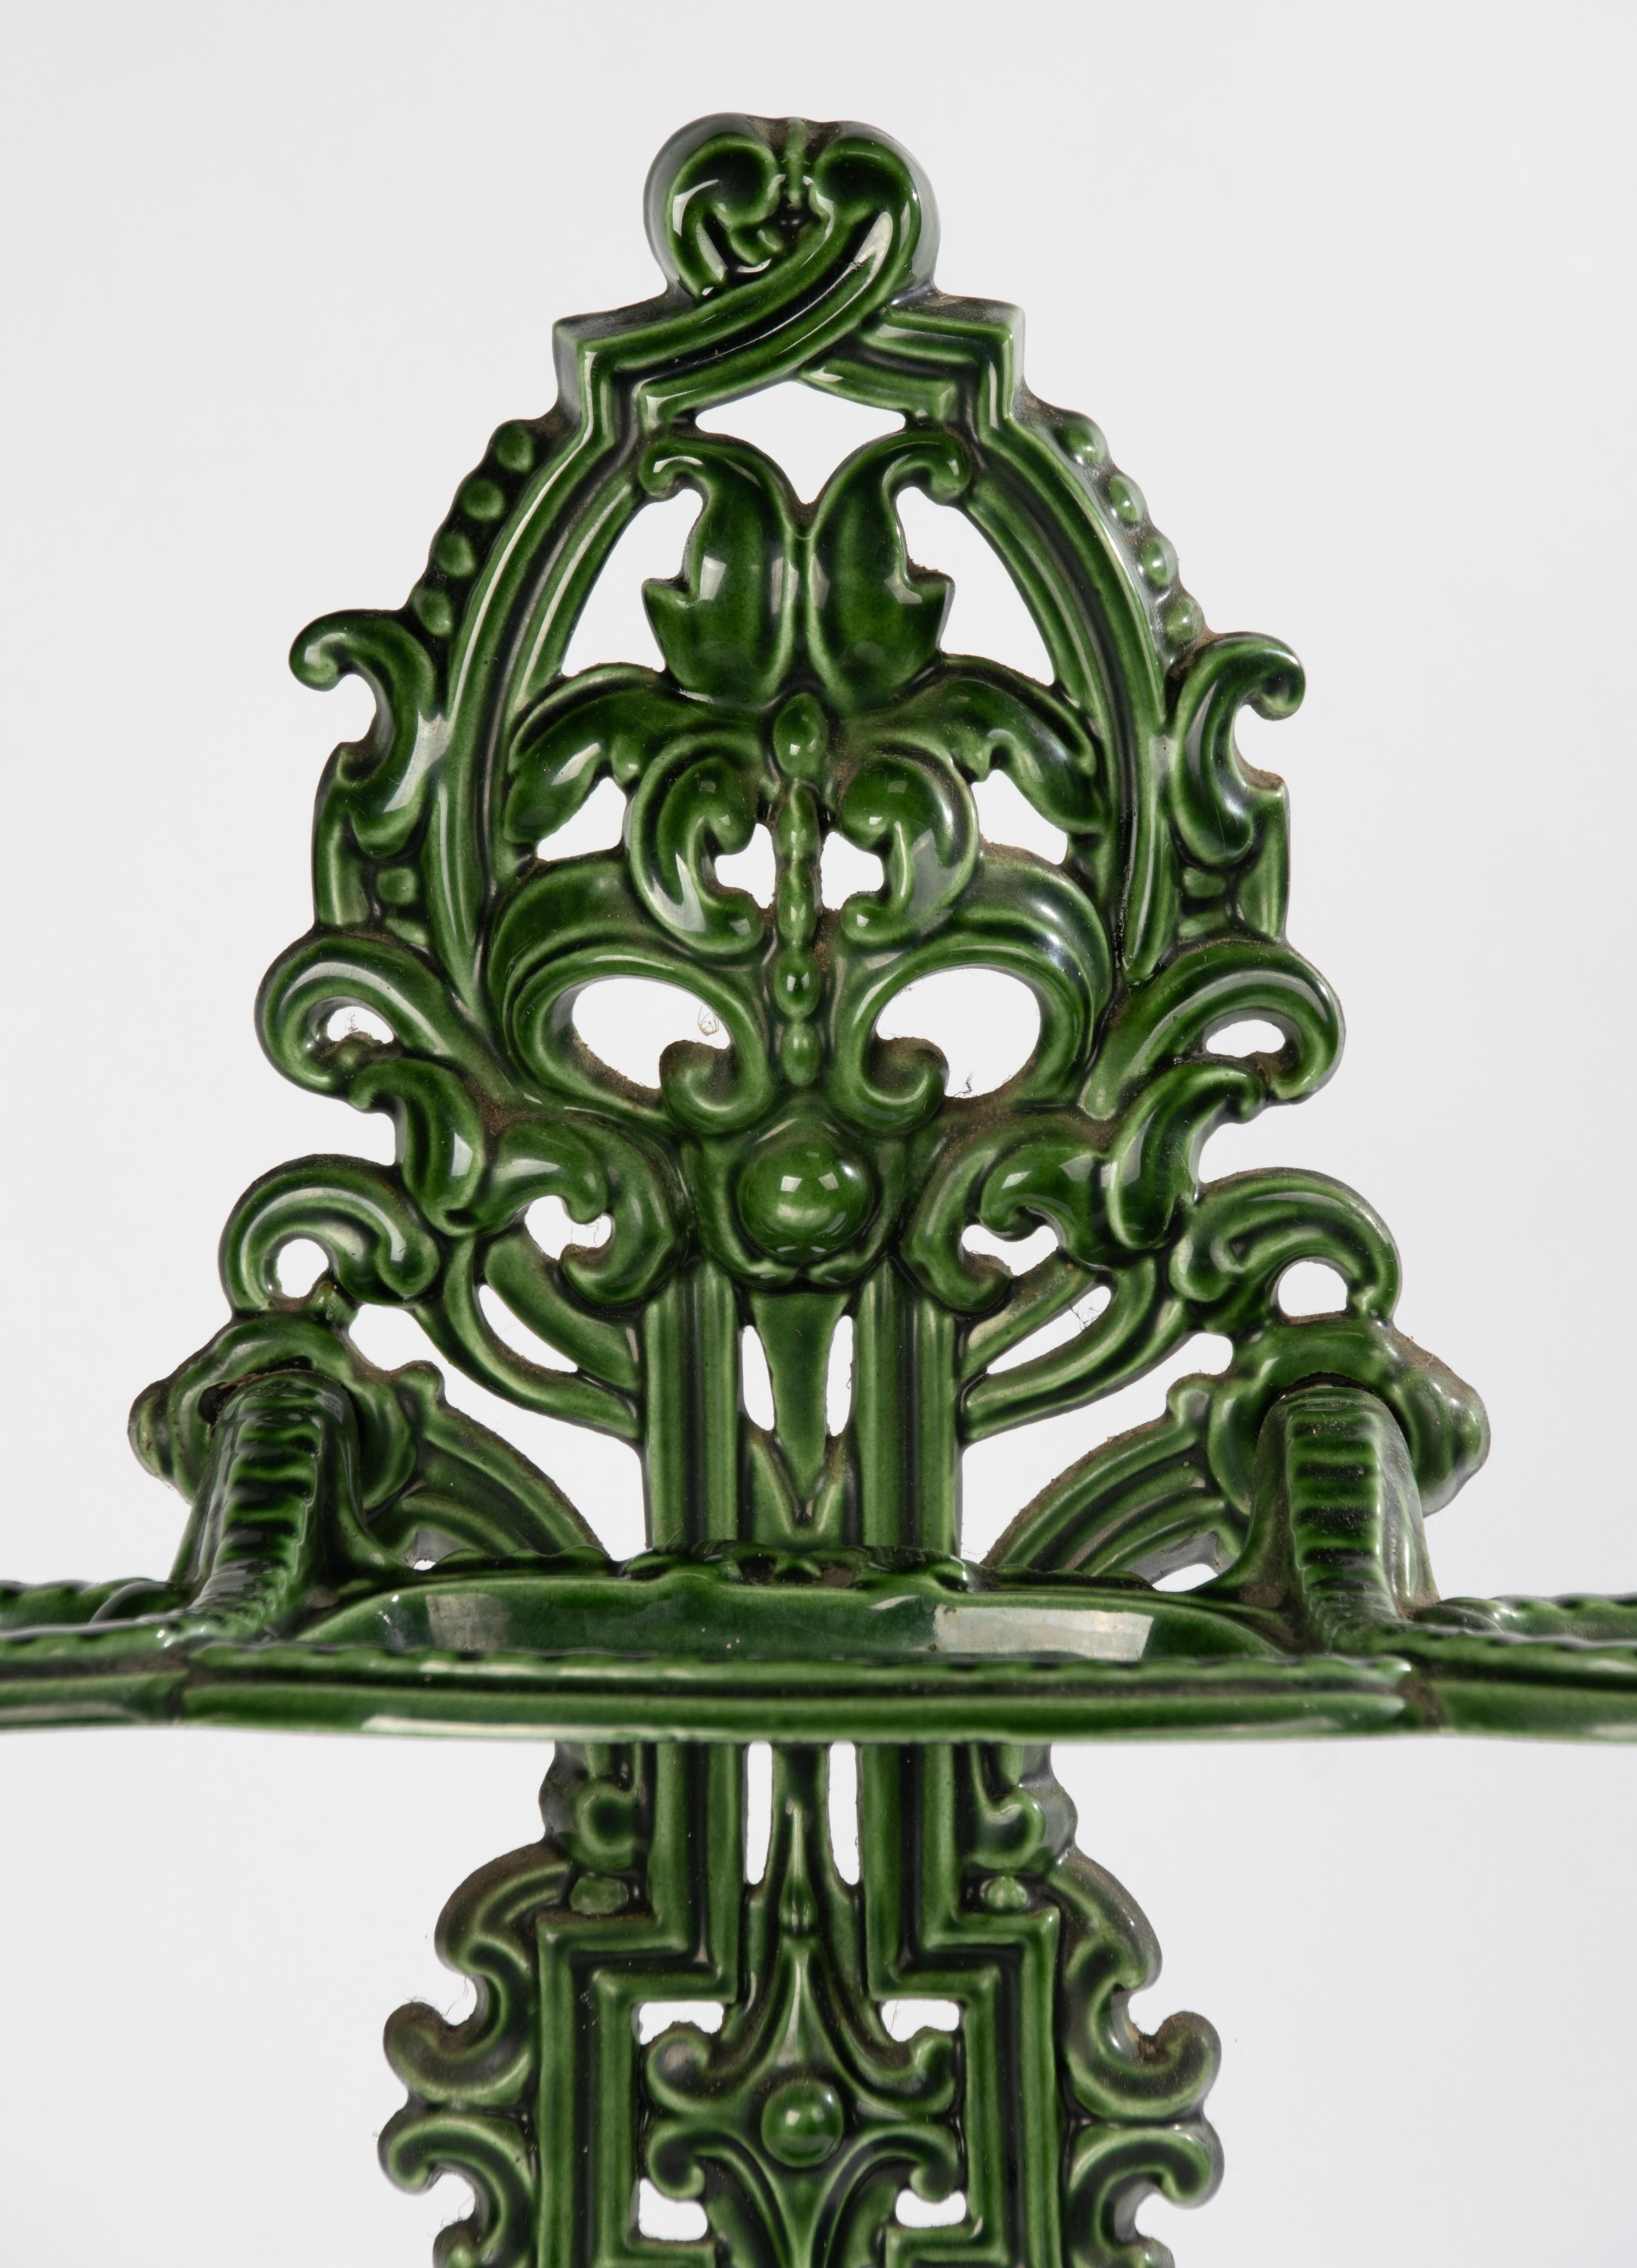 An elegant umbrella stand, made of enameled cast iron. Made in France, circa 1910-1920. In good condition. The stand can be dismantled for safe transport. 

Dimensions: 62,5(h) x 55 x 18 cm
Free shipping worldwide